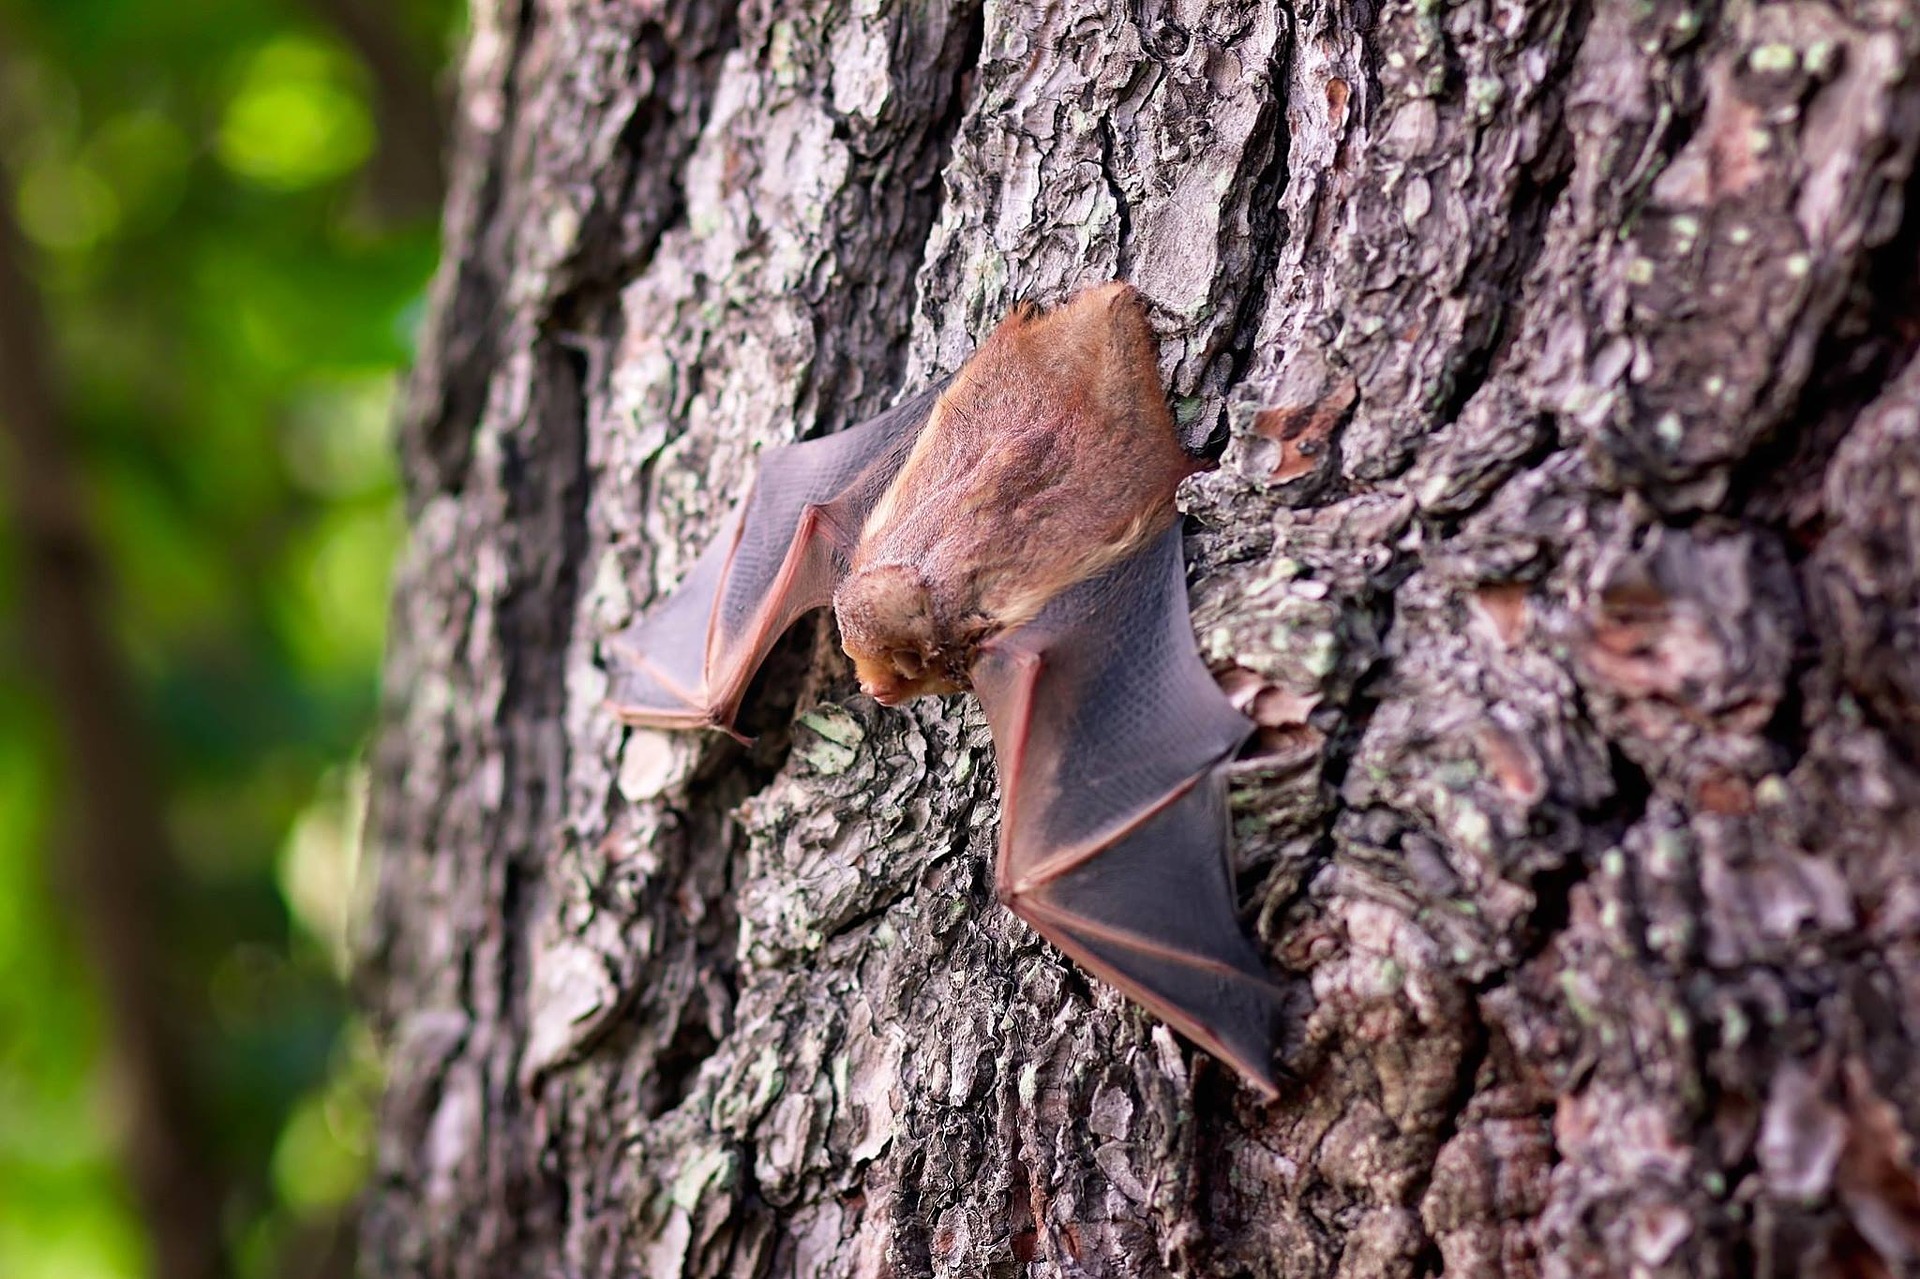 Bat clinging upside down on the bark of a tree